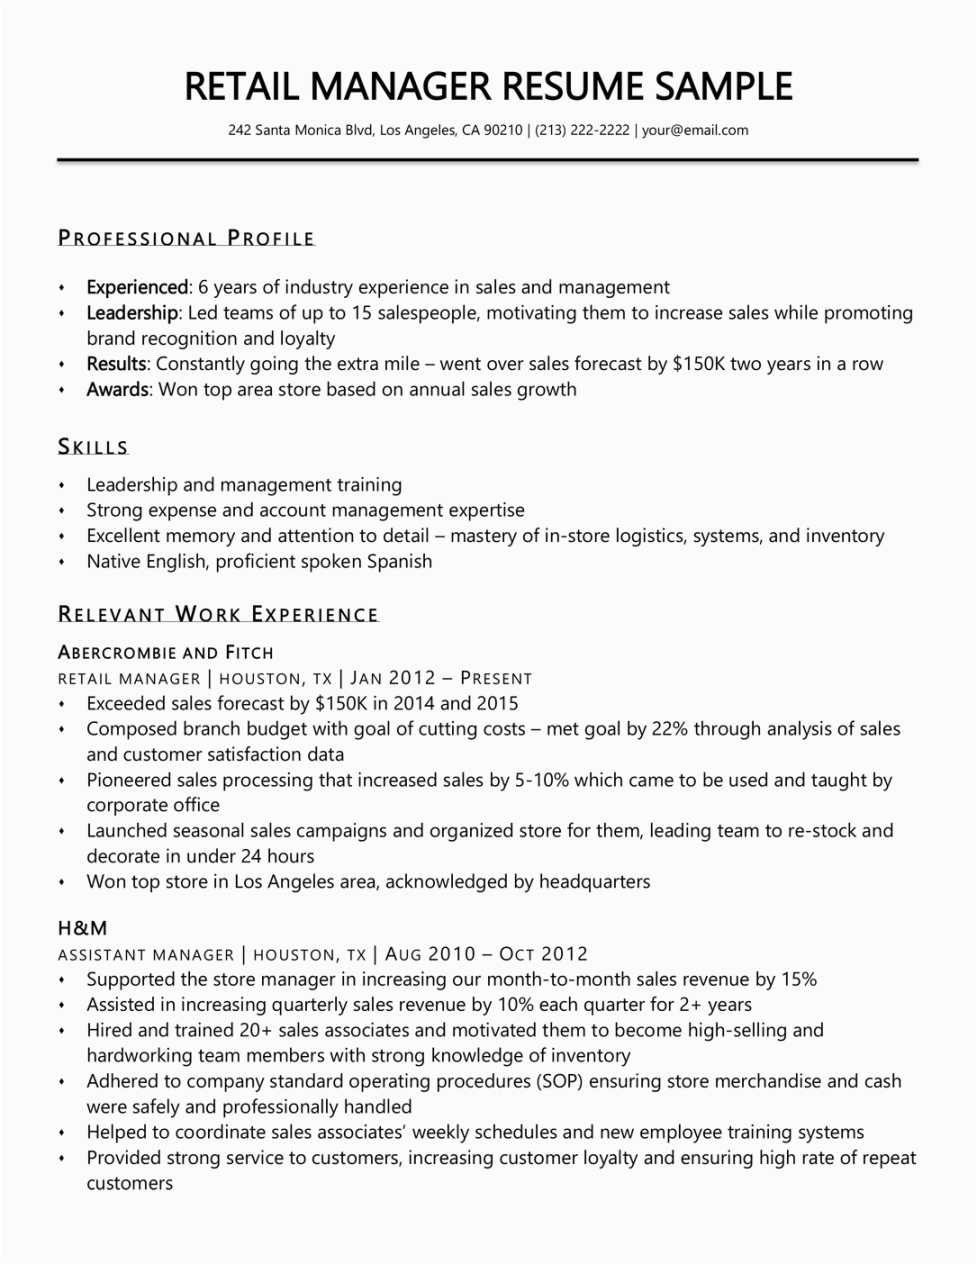 Sample Resume for Retail Management Position Retail Management Resume Template